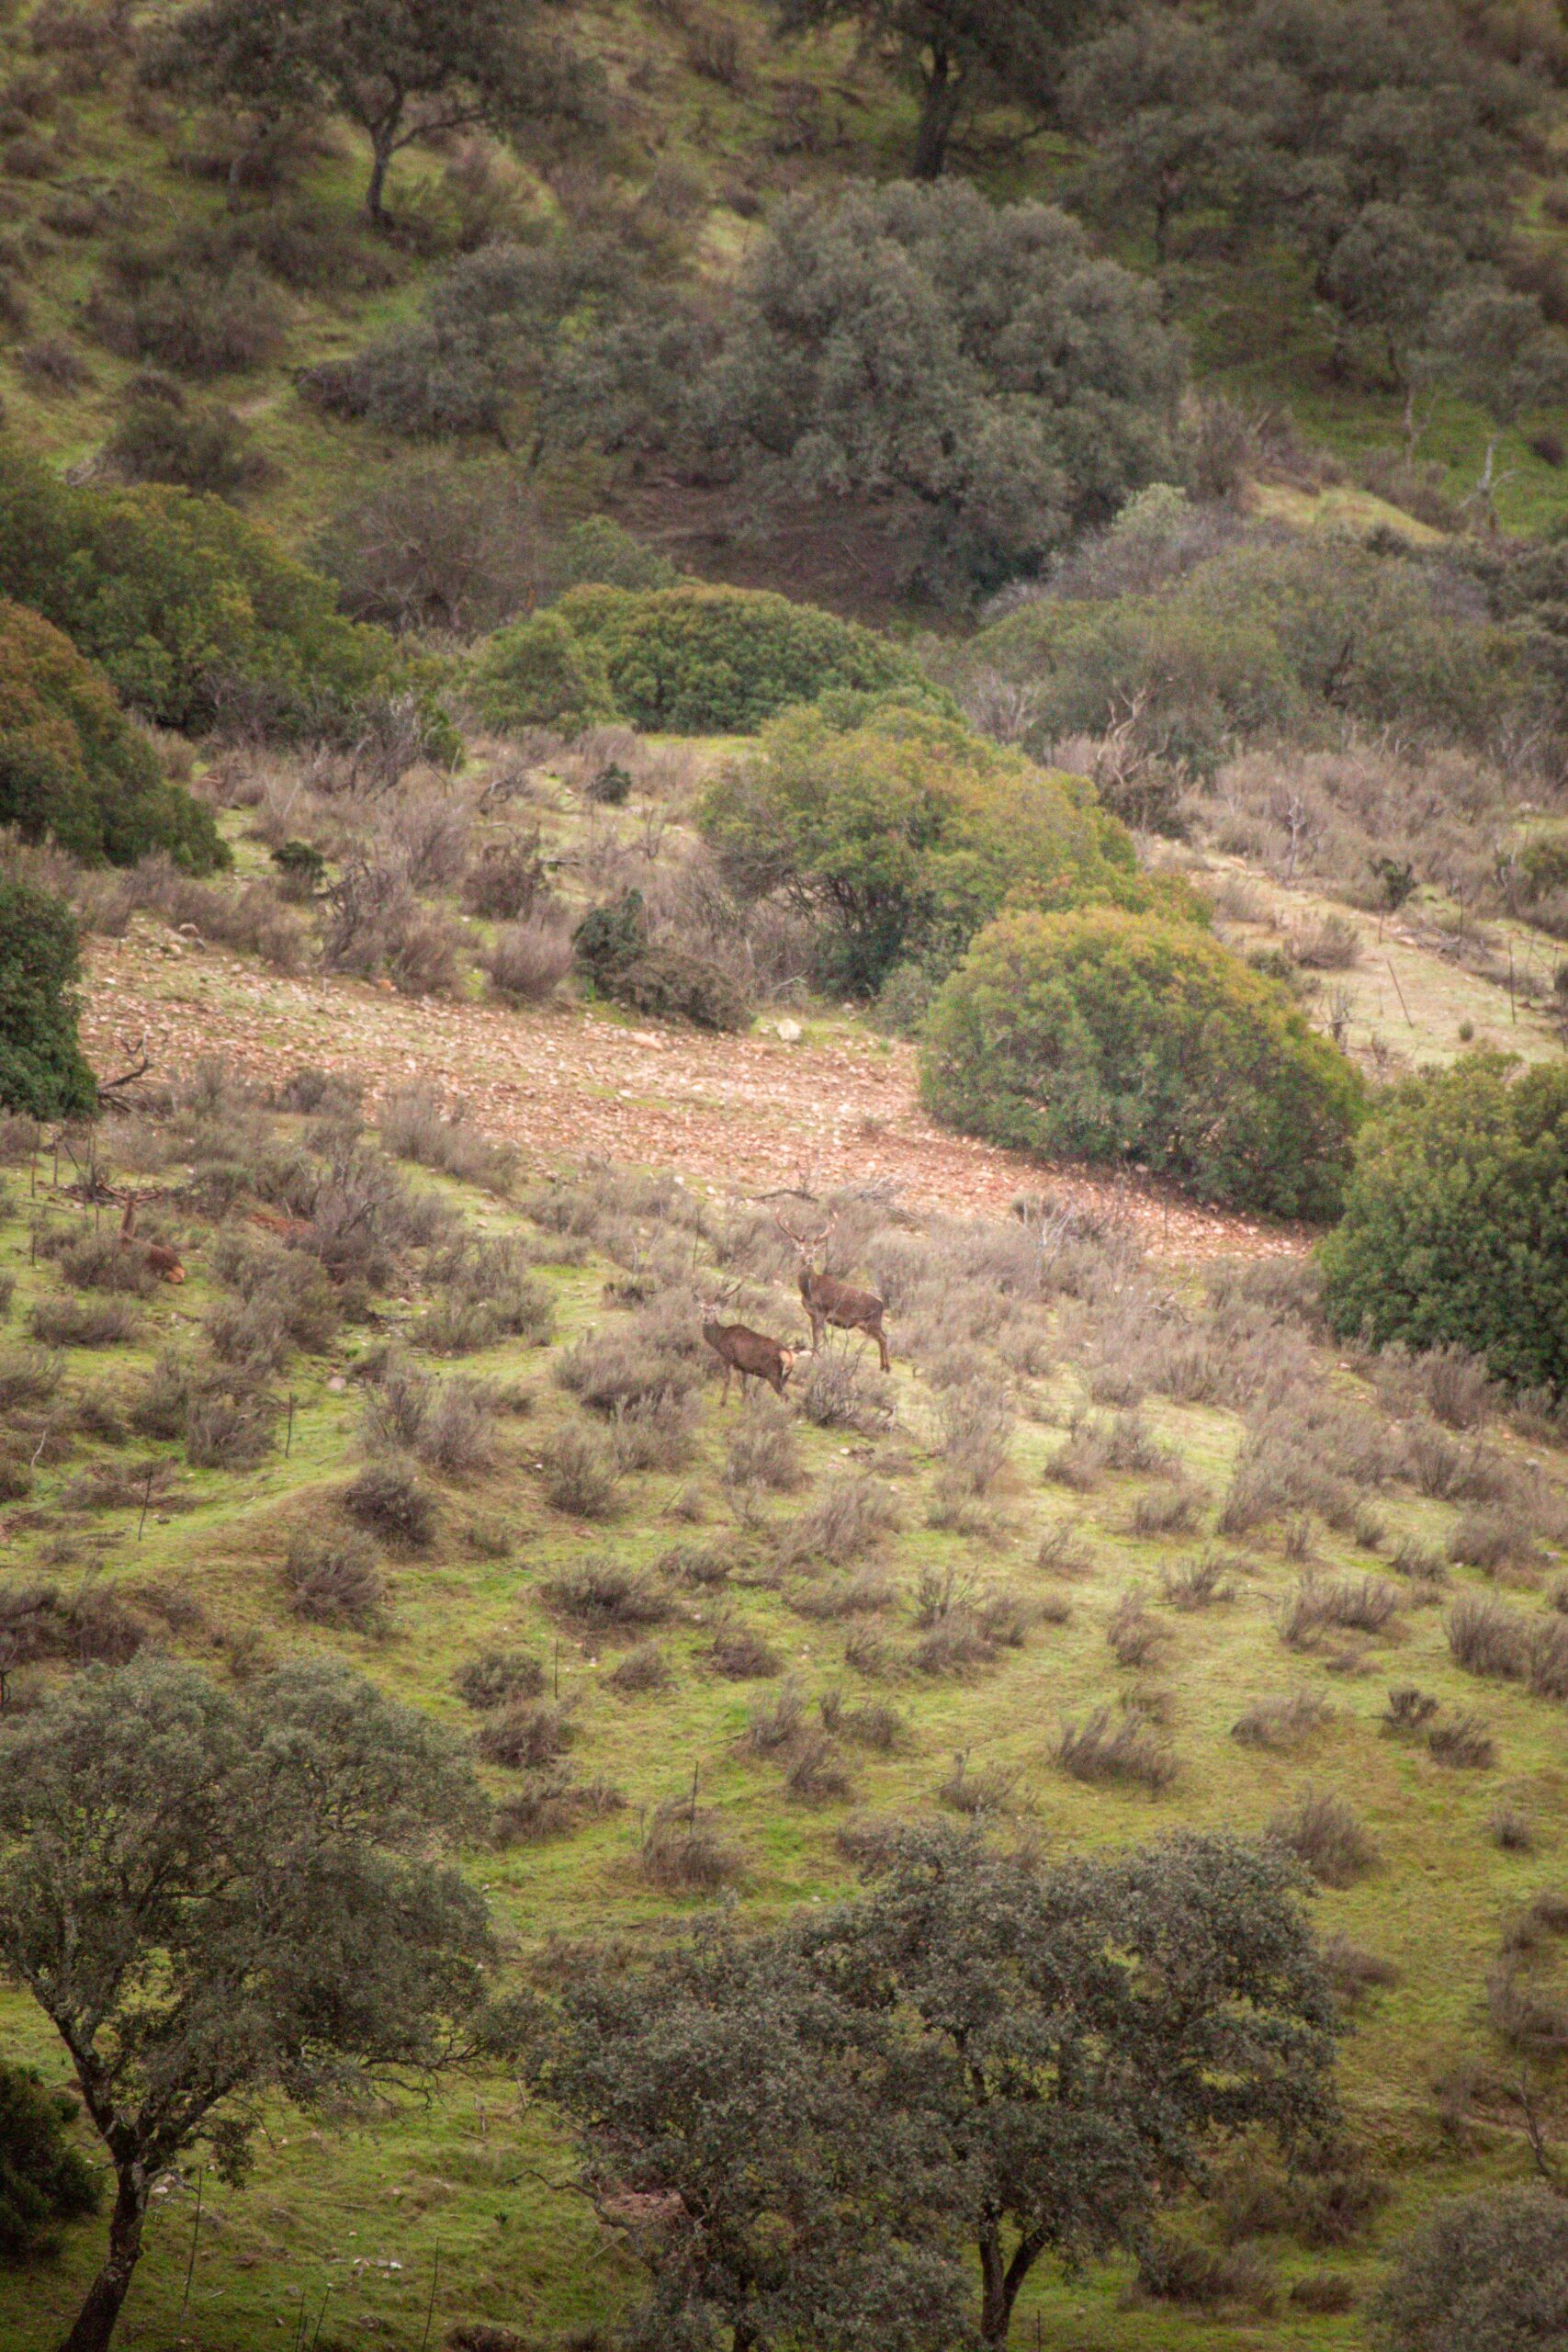 Deers in the distance in a valley of Andújar Natural Park, Provincia de Jaén, Andalusia, Spain